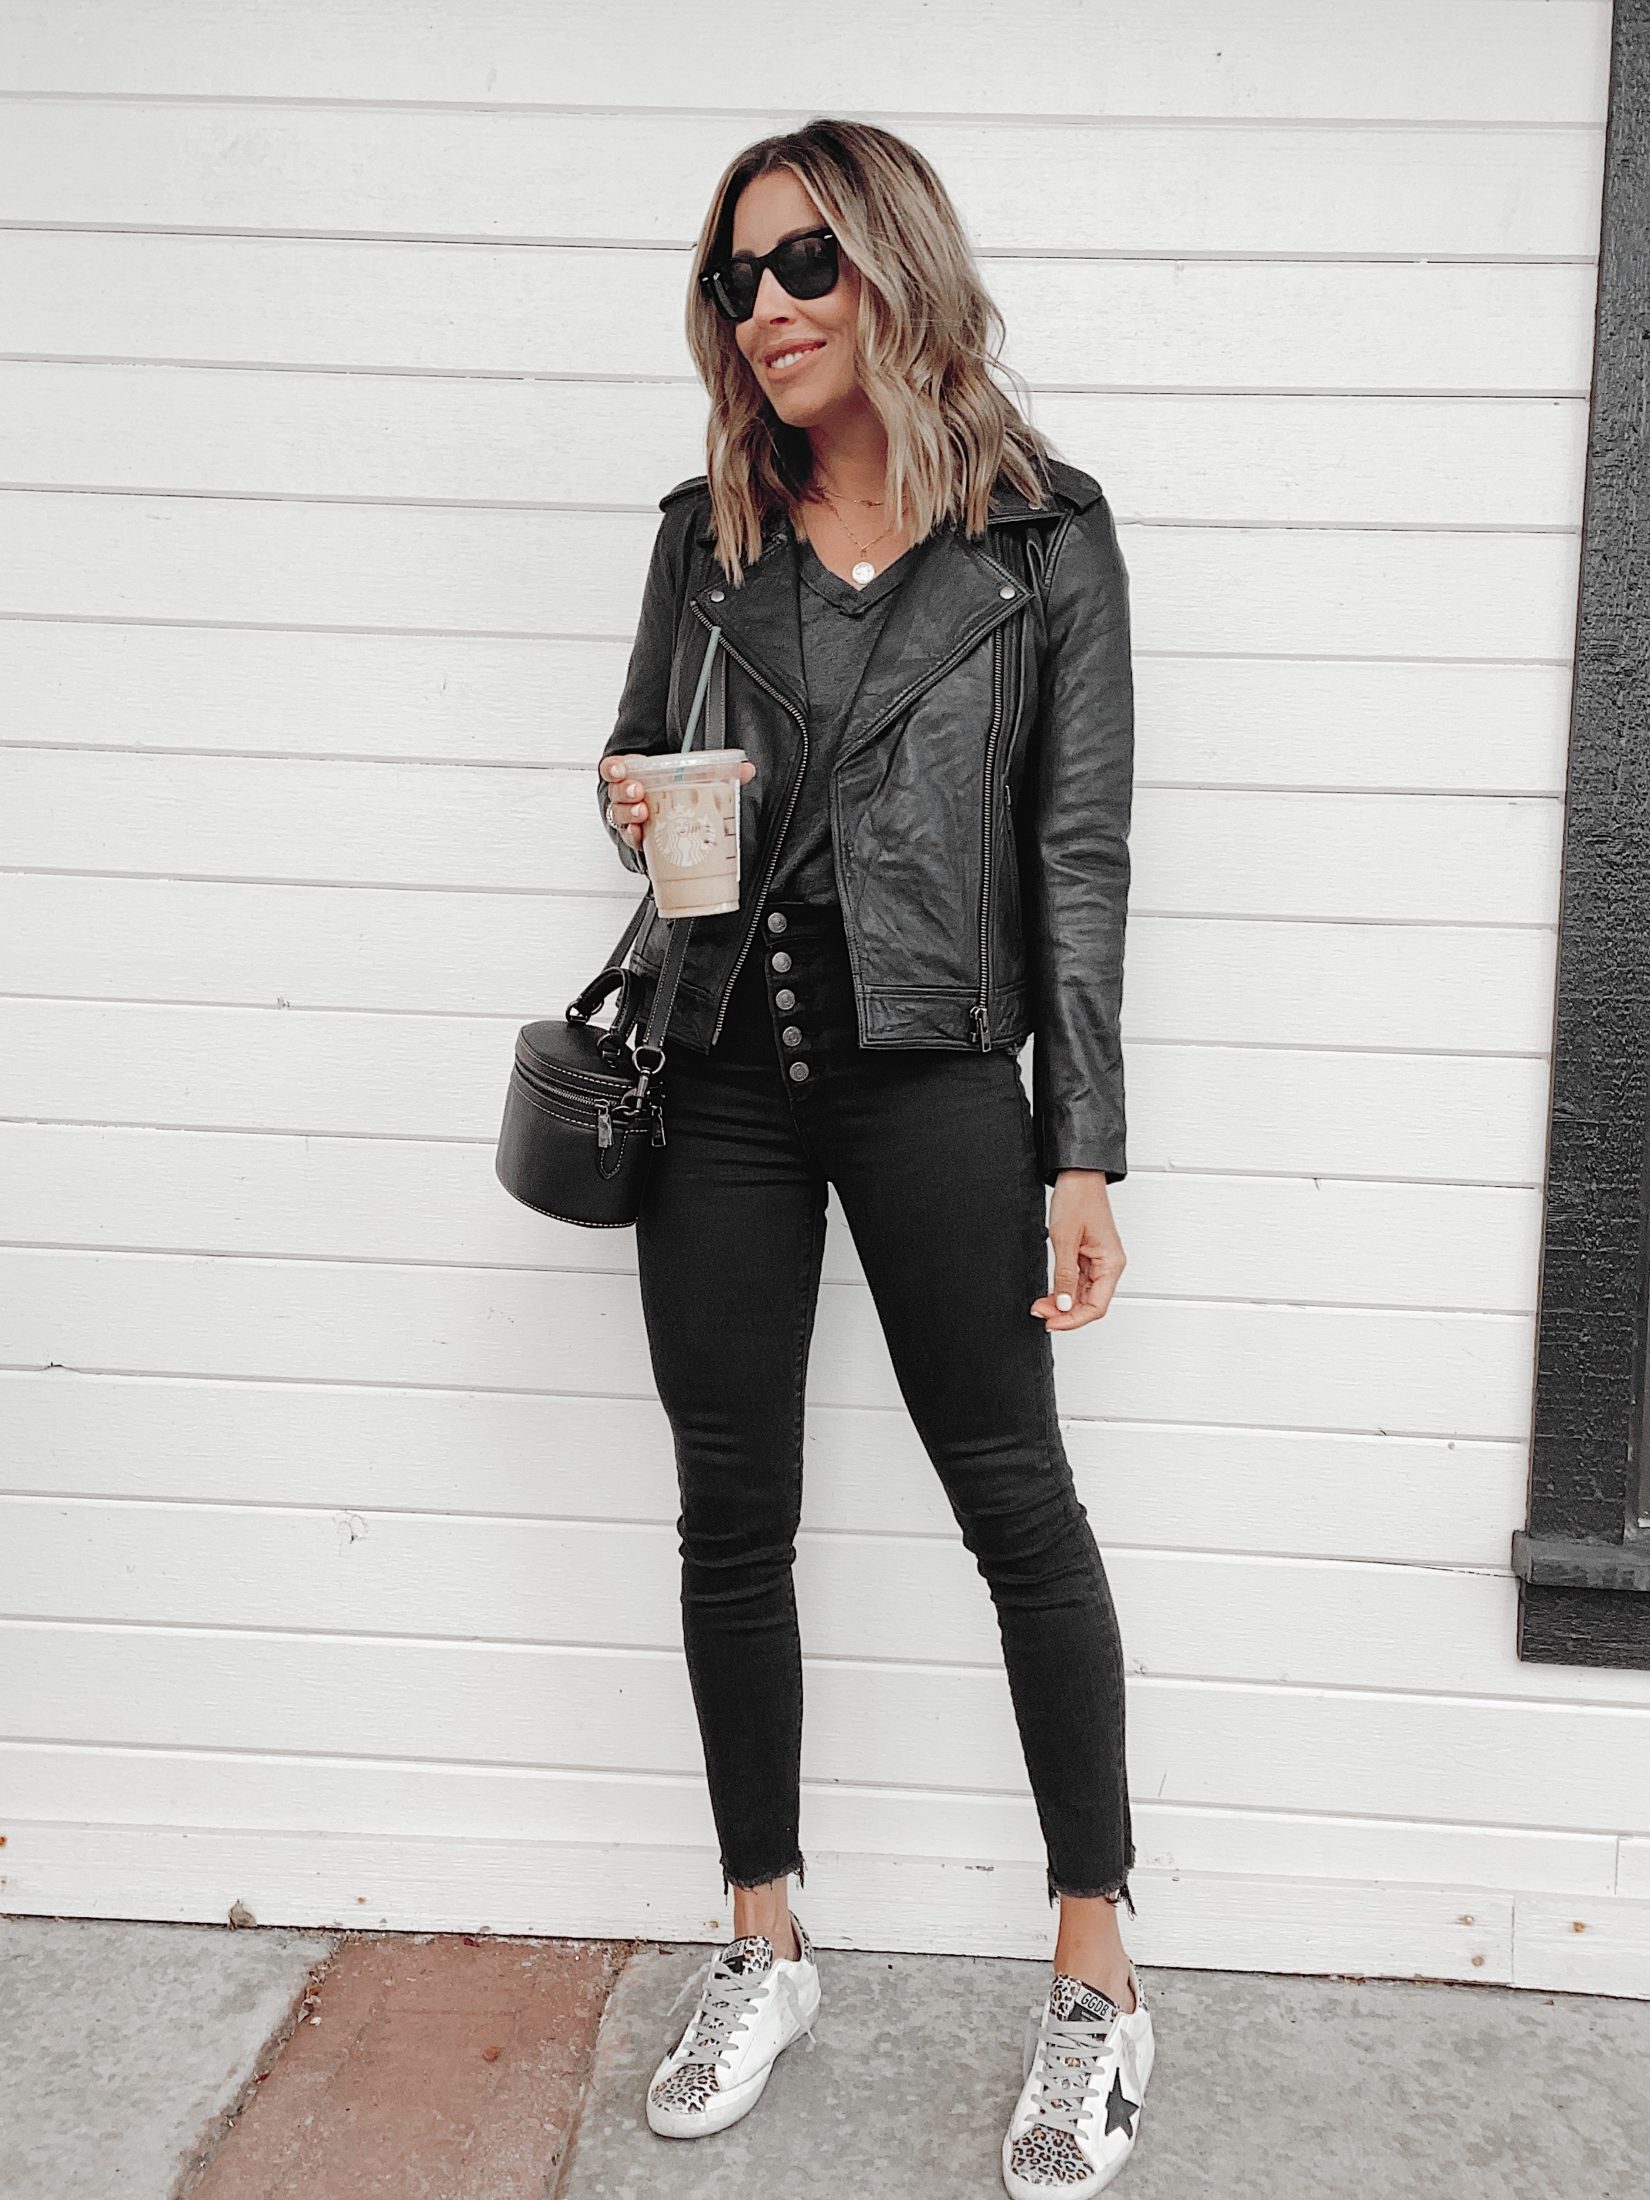 jaime shrayber styling black faux leather biker jacket with black jeans for fall 2020